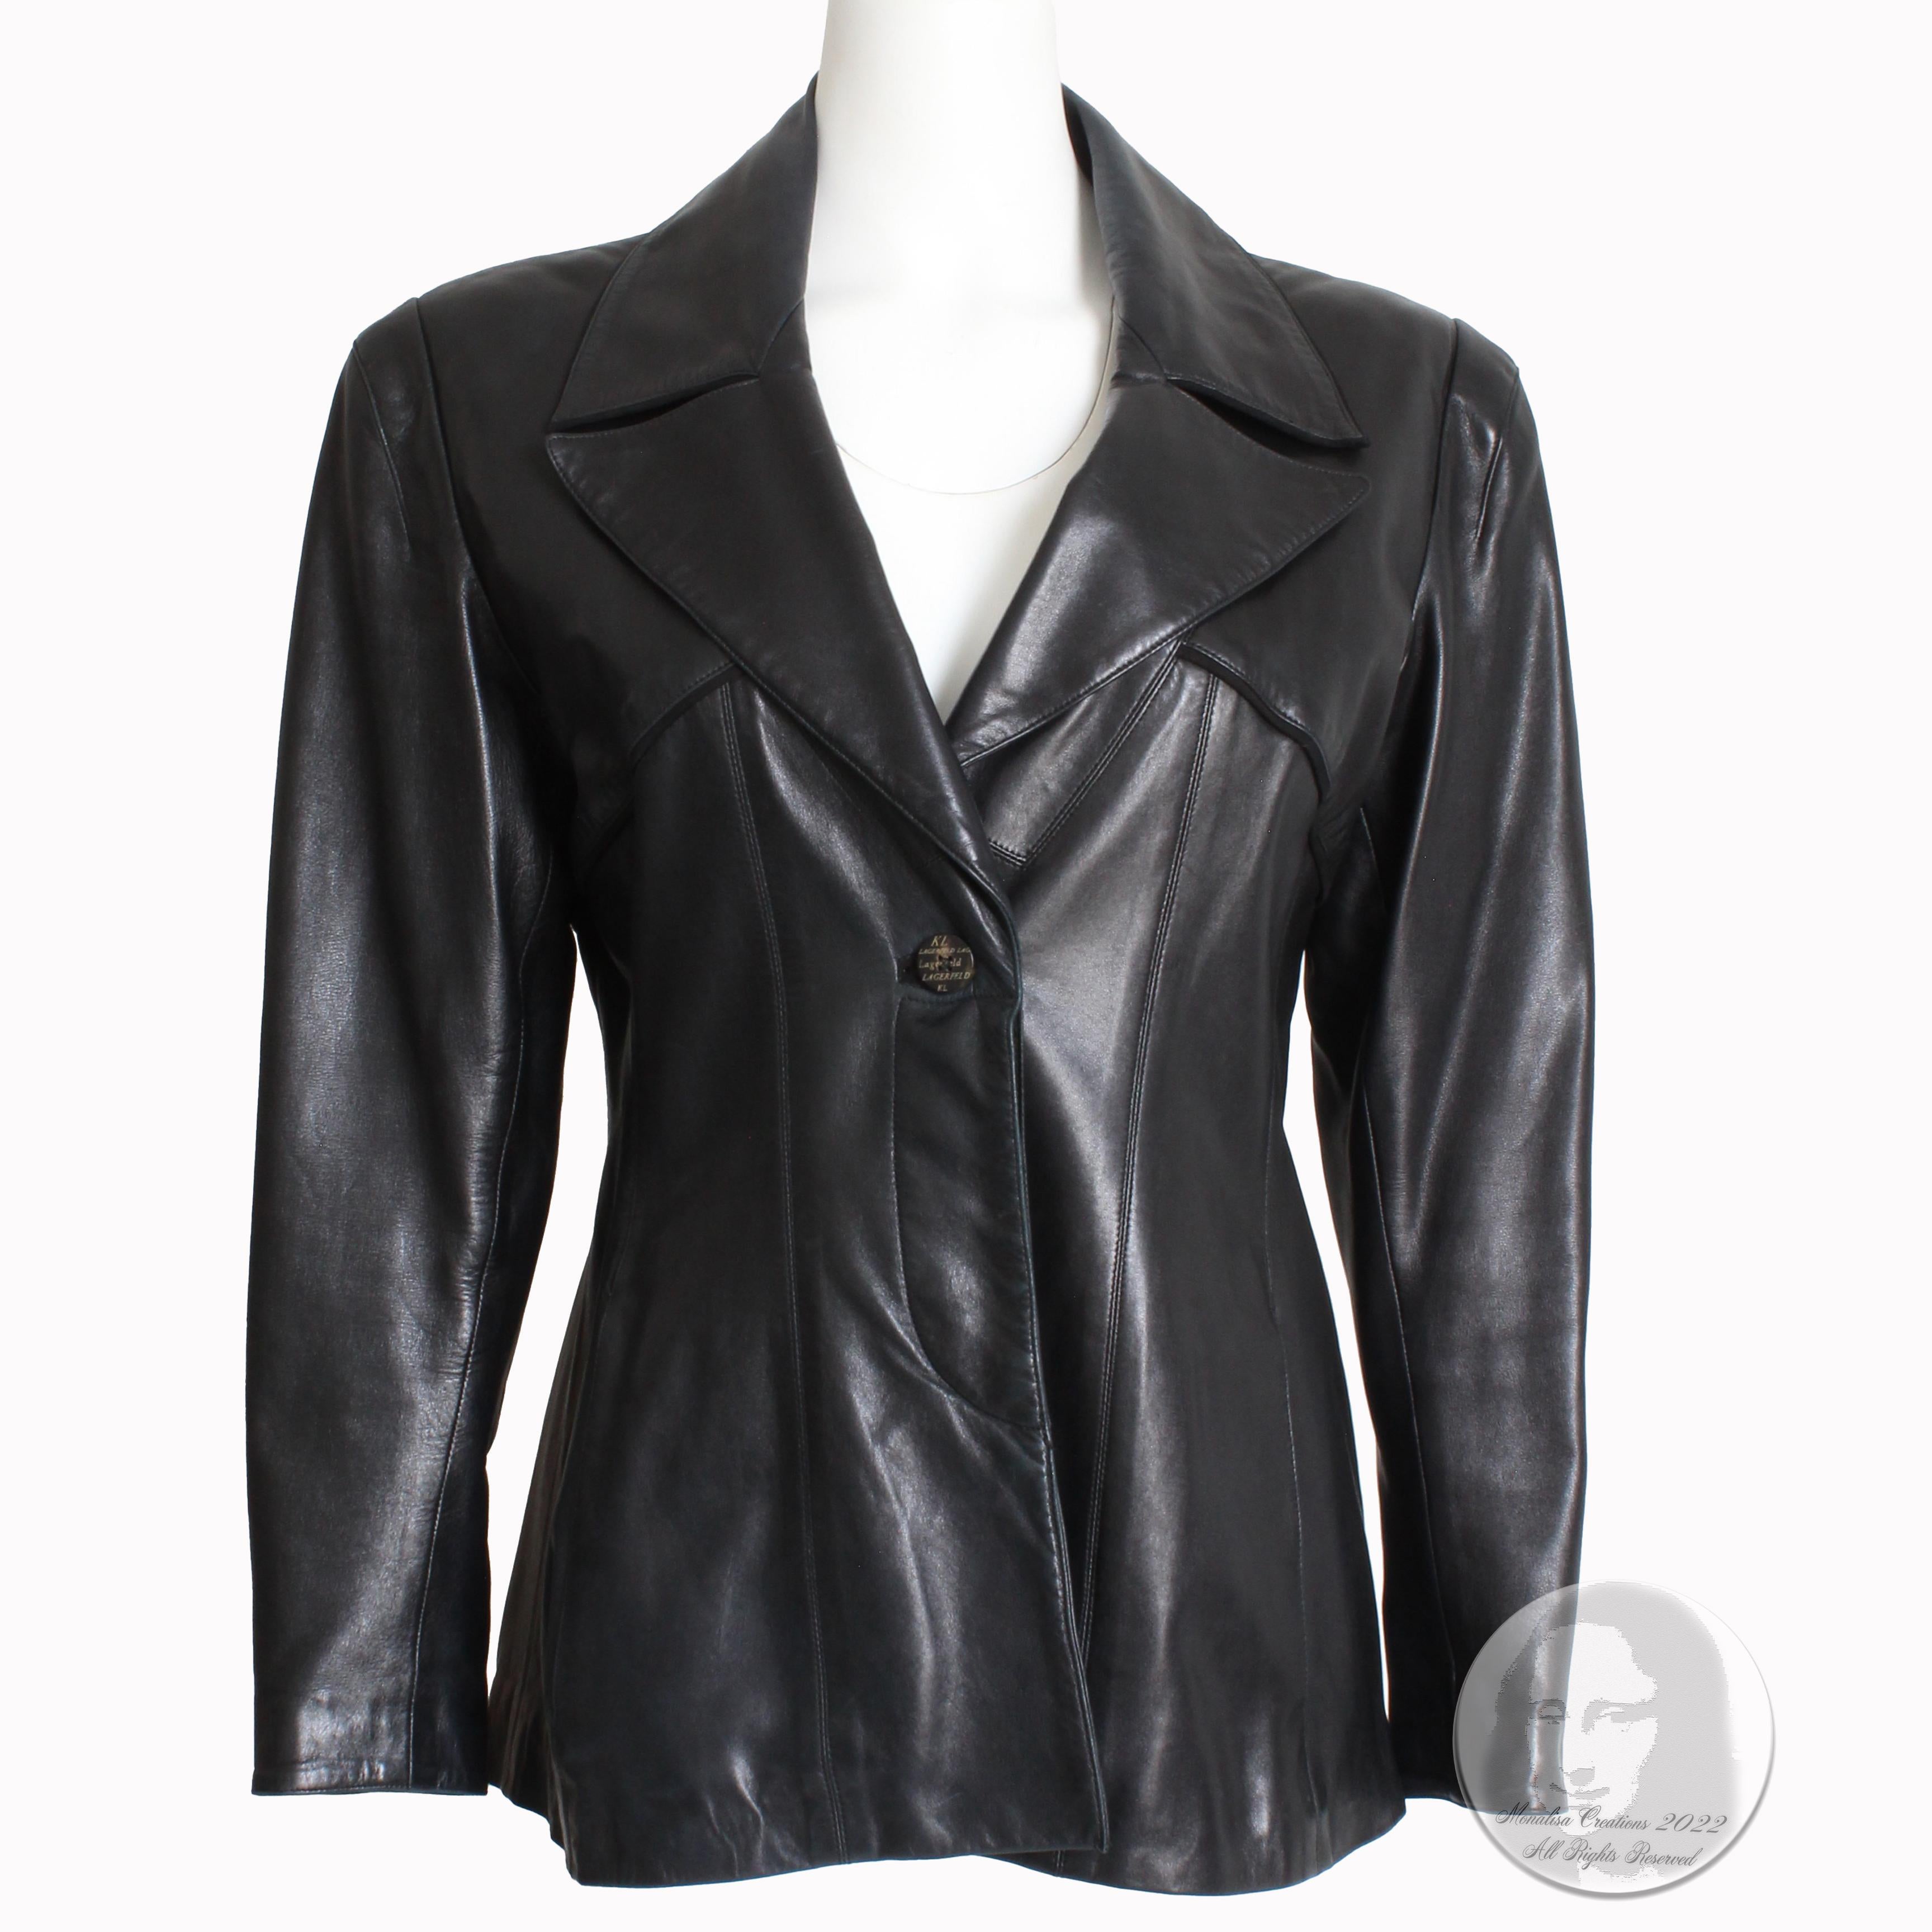 90s Karl Lagerfeld Jacket Black Lambskin Leather Fred Hayman Beverly Hills  In Good Condition For Sale In Port Saint Lucie, FL